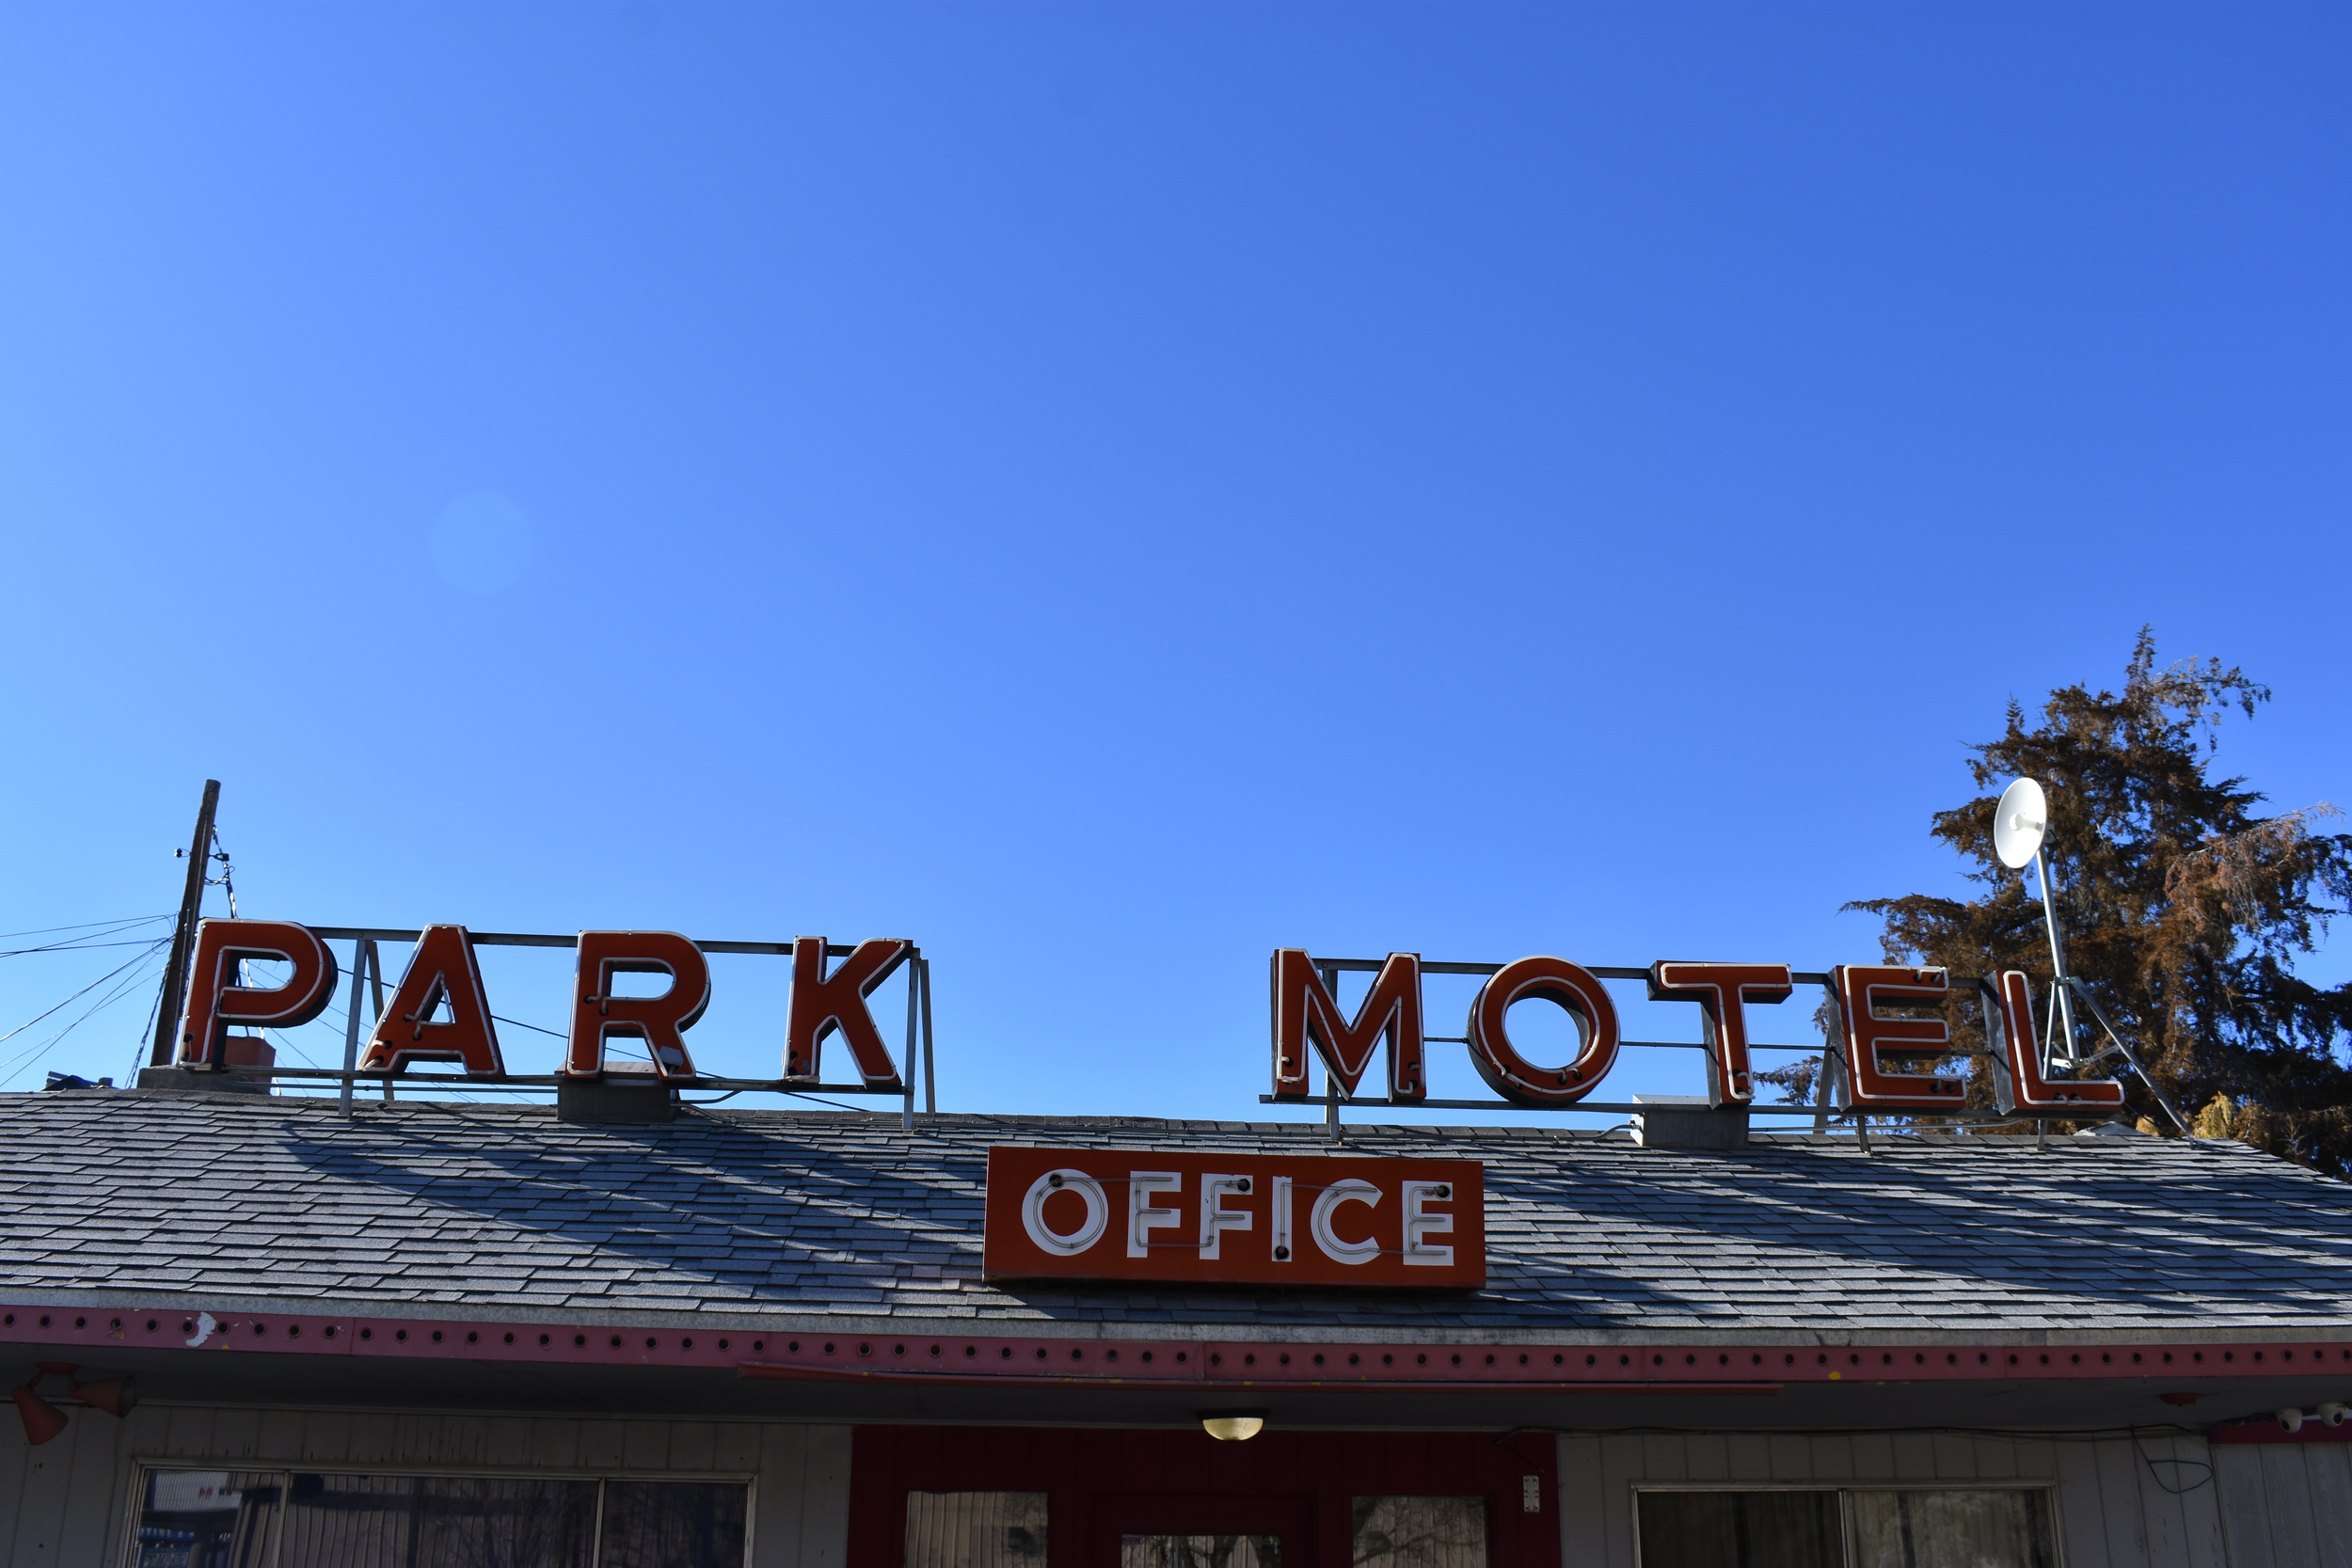 Park Motel roof mounted sign, Winnemucca, Nevada